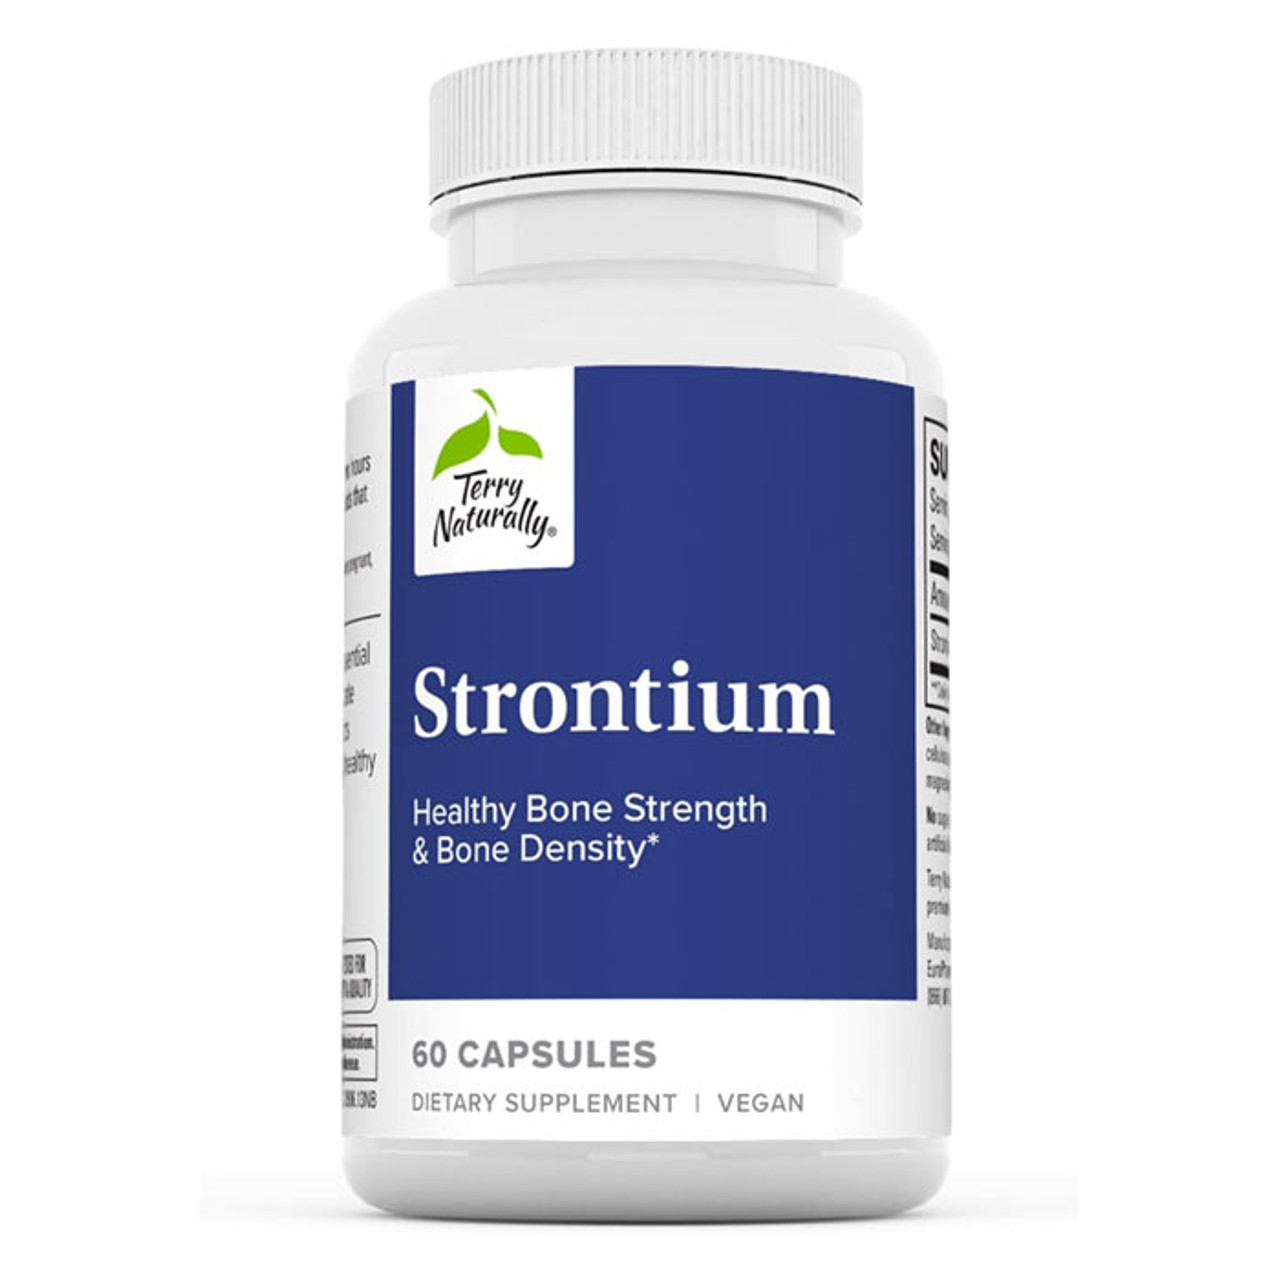 Terry Naturally Strontium picture of product bottle